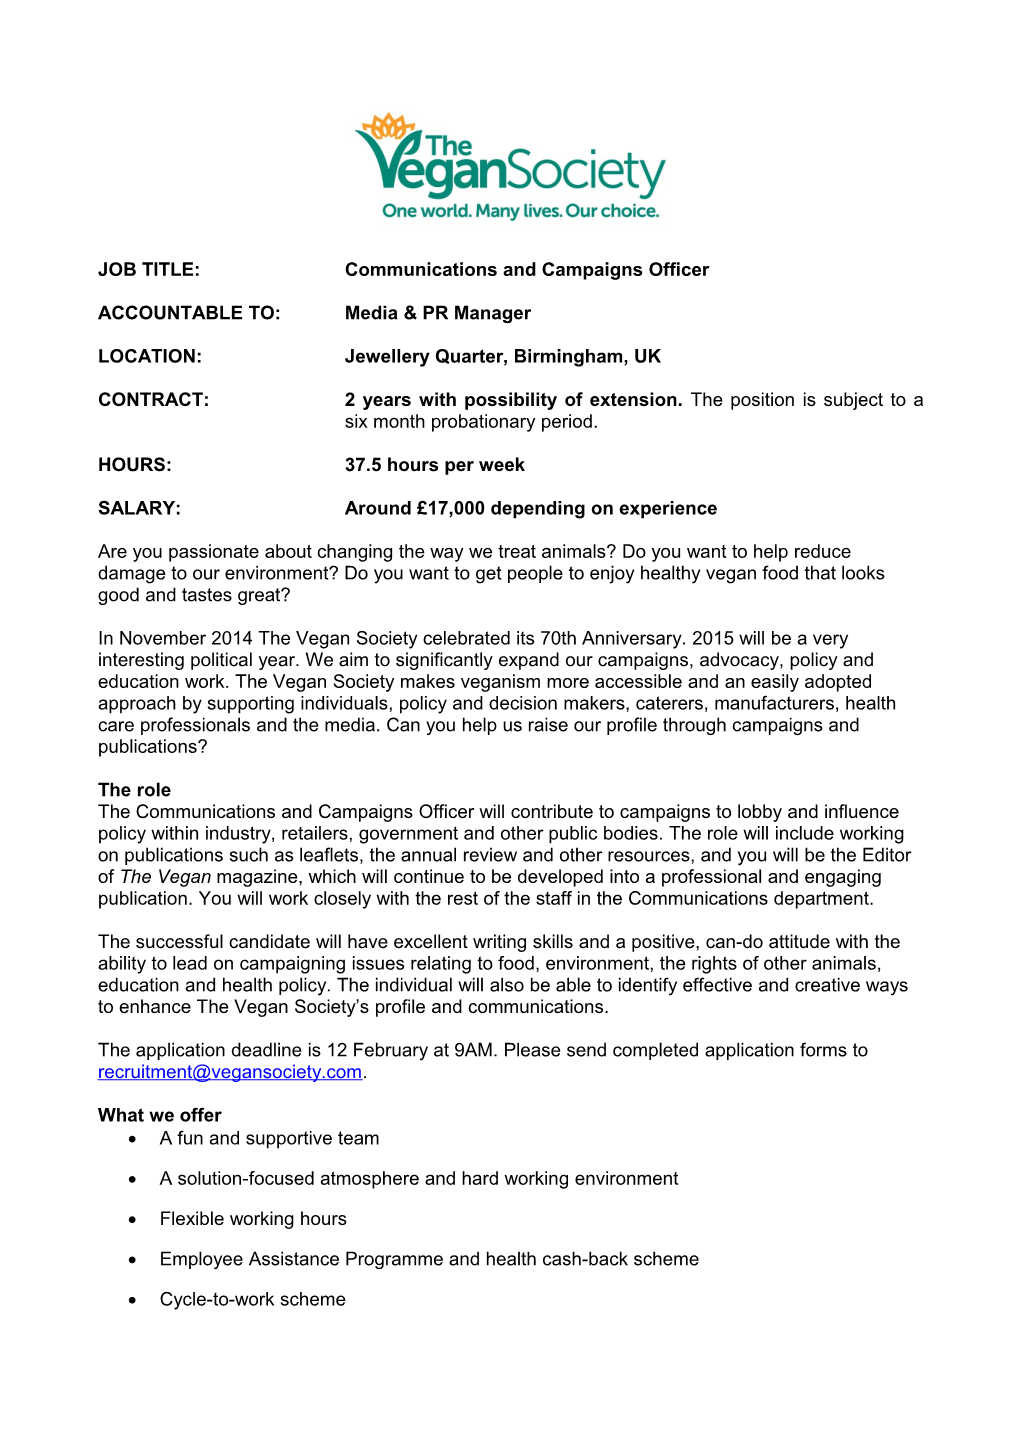 JOB TITLE: Communications and Campaigns Officer